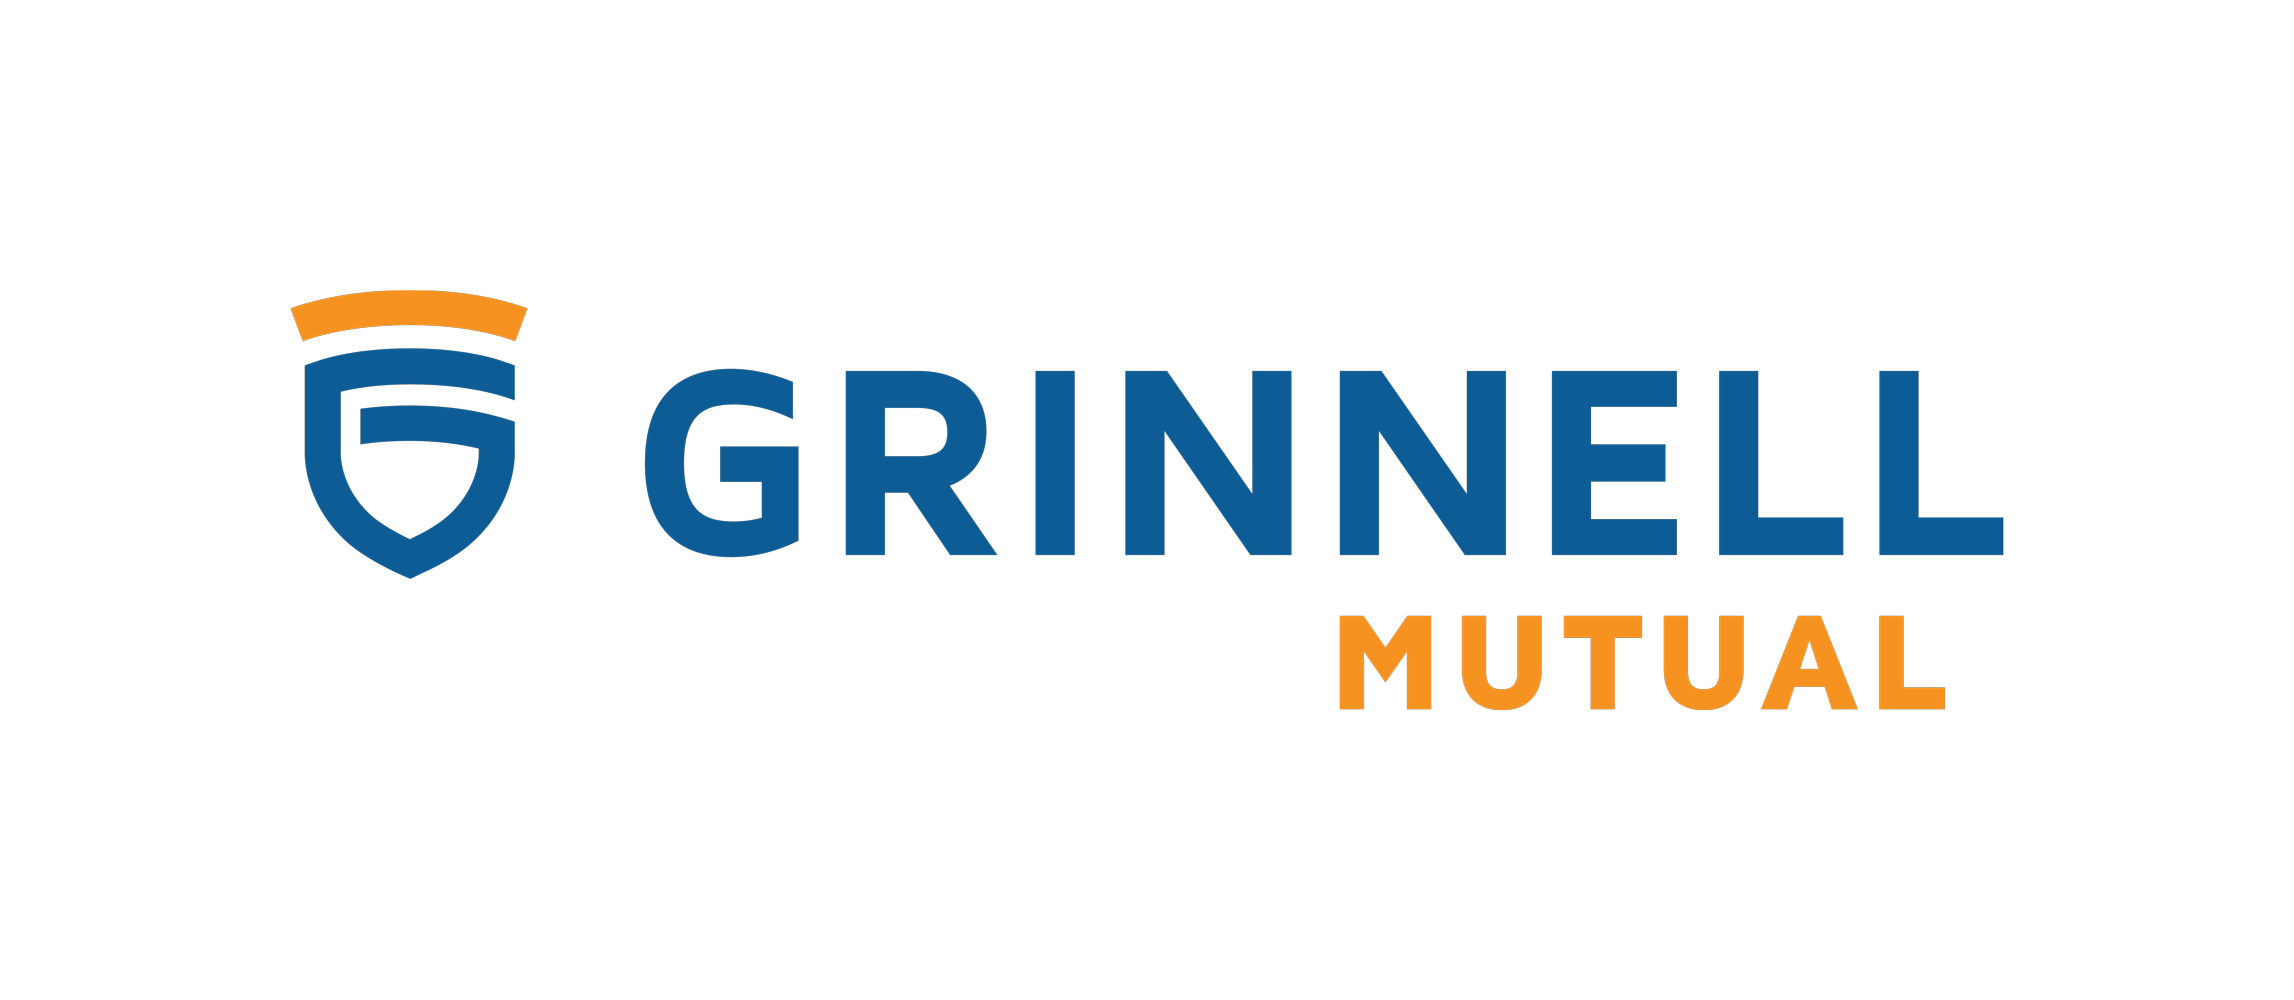 Grinnell Mutual Company Logo